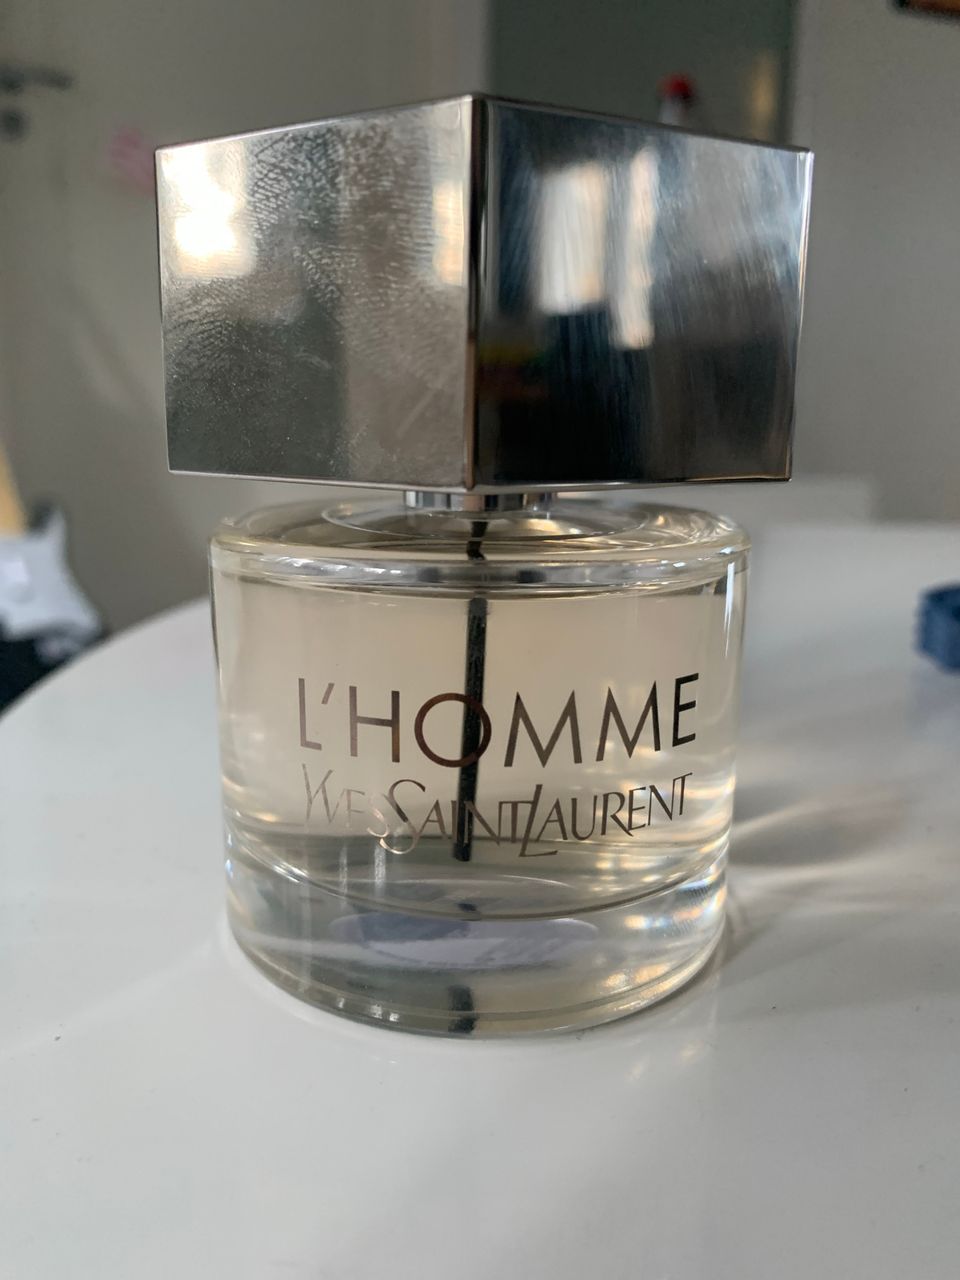 Ysl l’homme edt